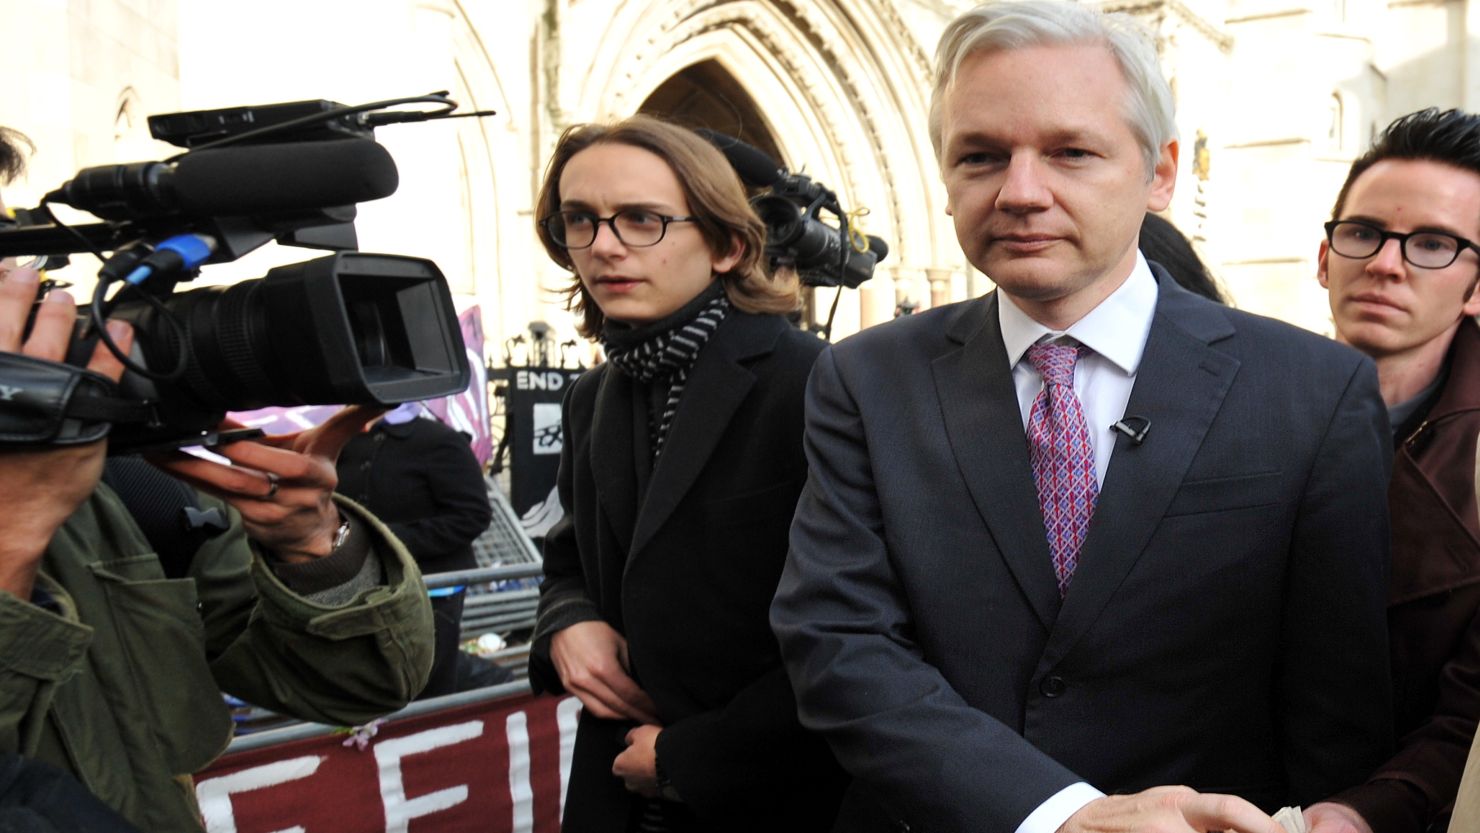 WikiLeaks founder Julian Assange leaves London's High Court in December in his fight against extradition to Sweden.